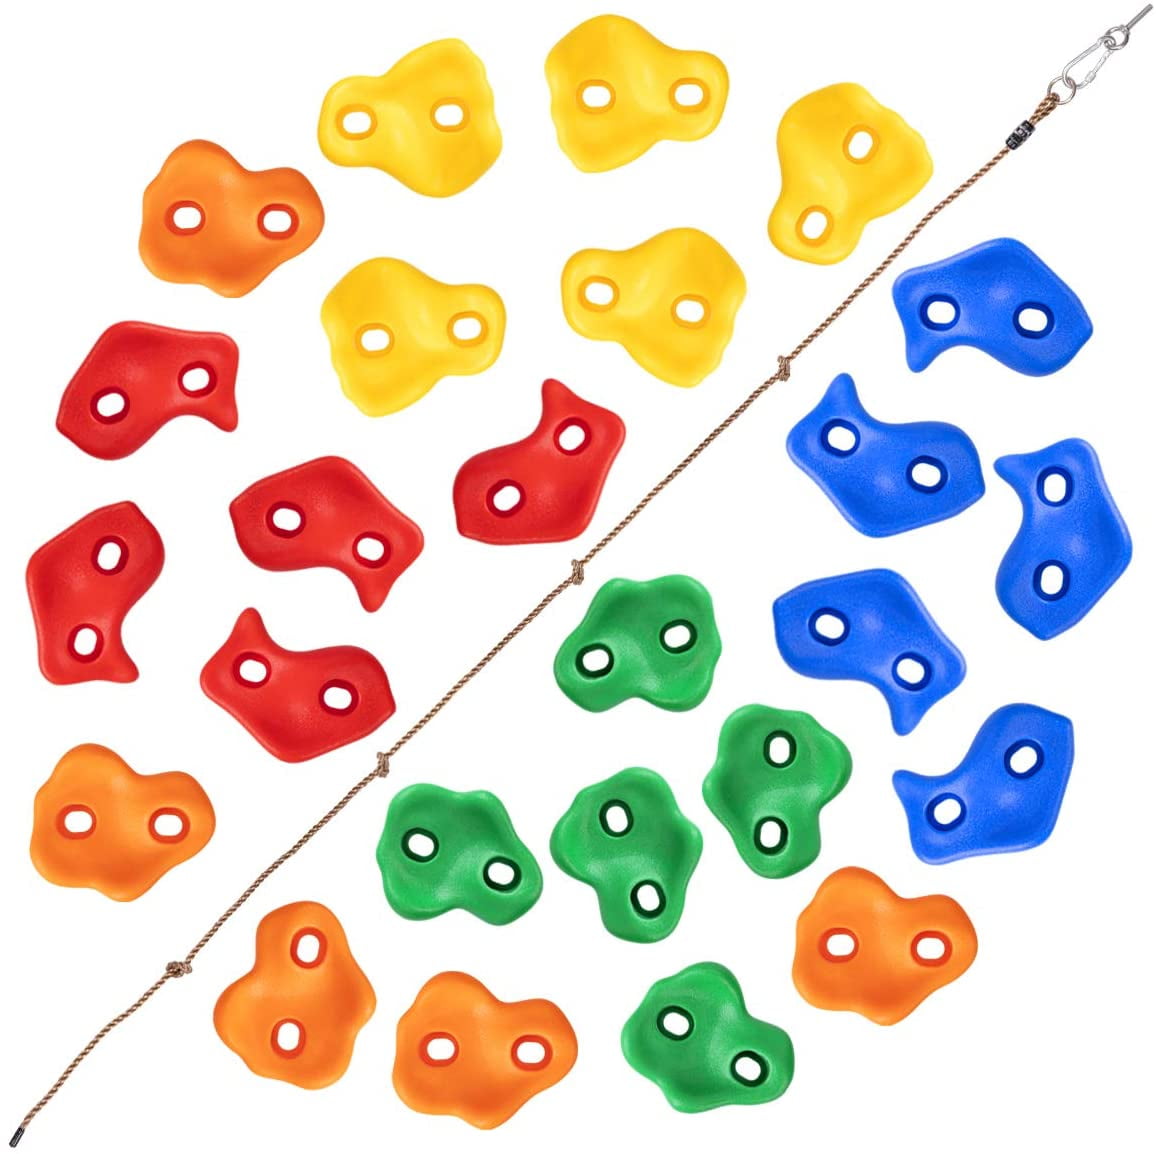 30Pcs Multi-Colored Pack of Rock Climbing Holds for Kids and Adults,Large Rock Wall Grips for Indoor and Outdoor Play Set Outdoor Indoor Playground Plastic Hardware Toy 